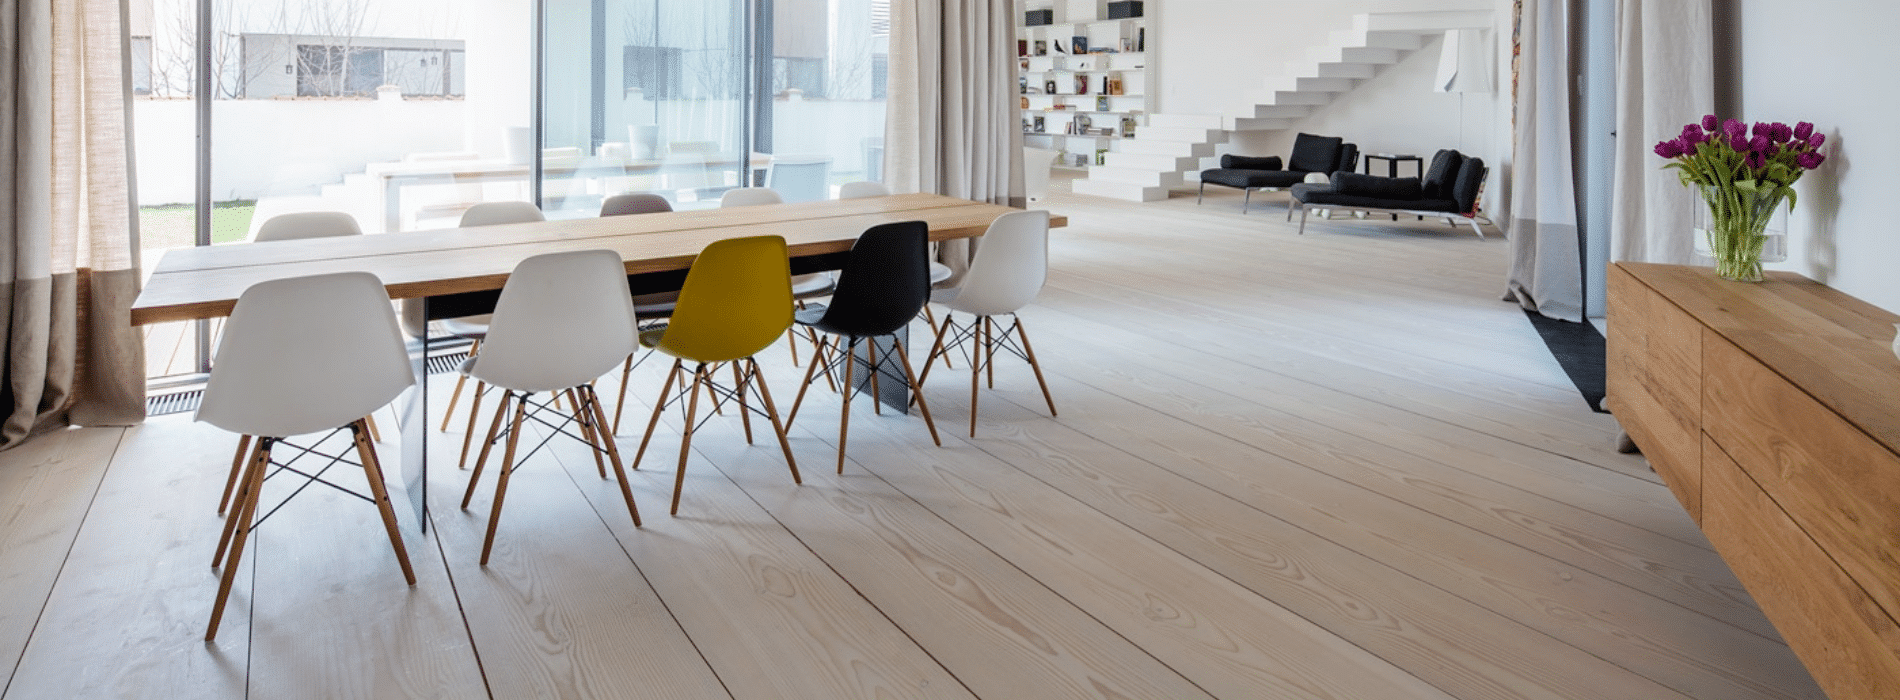 Engineered oak floor expertly restored by Mr Sander® in South Bermondsey, SE16, showcasing rich grain patterns with a satin Junckers Strong finish. A testament to timeless elegance and durable craftsmanship.